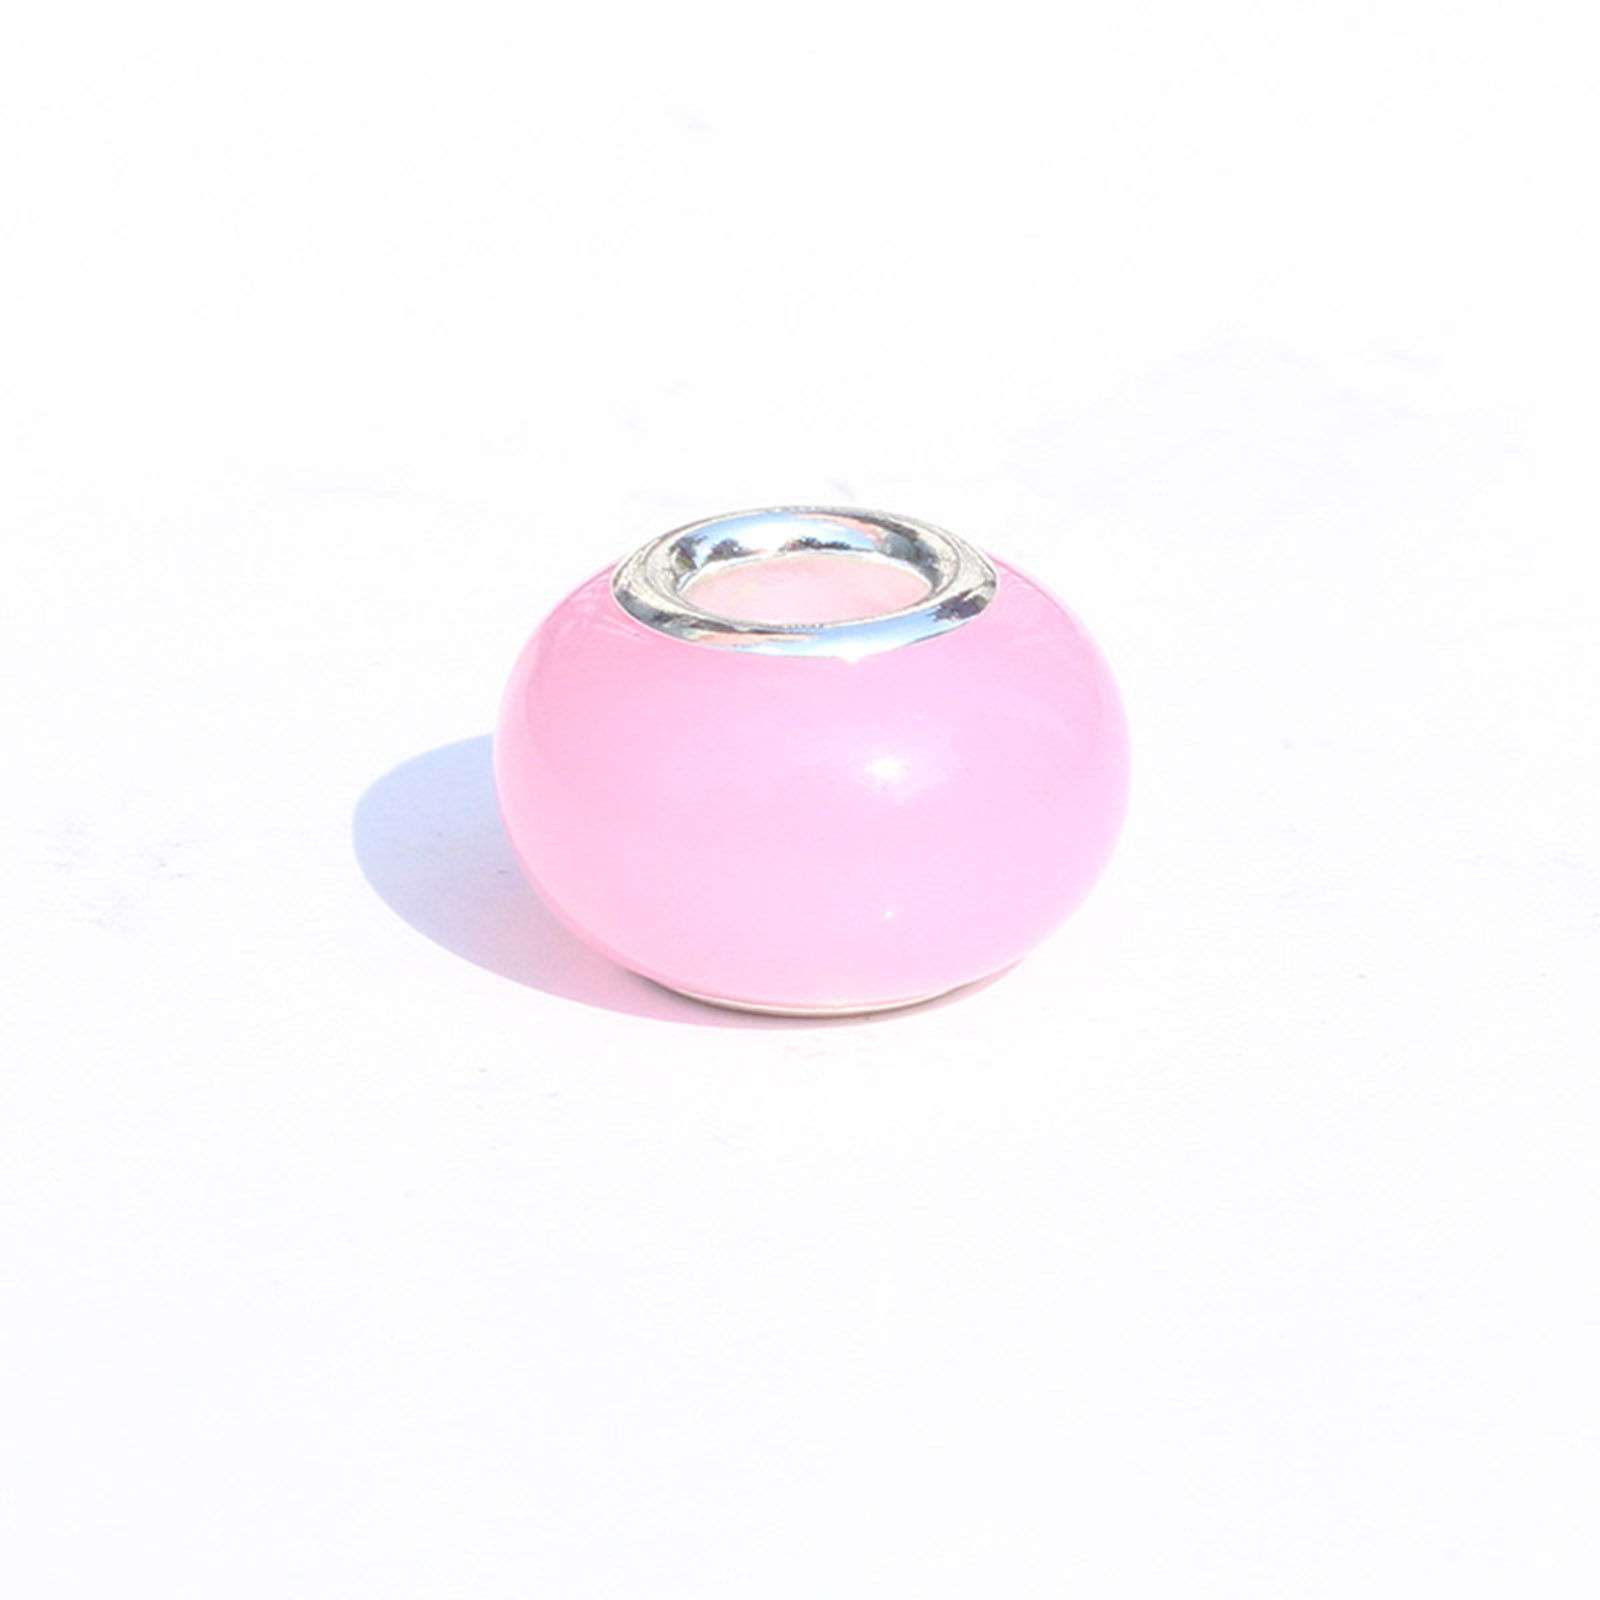 Picture of Resin European Style Large Hole Charm Beads Pink Round Glow In The Dark Luminous 14mm x 9mm, Hole: Approx 5mm, 20 PCs